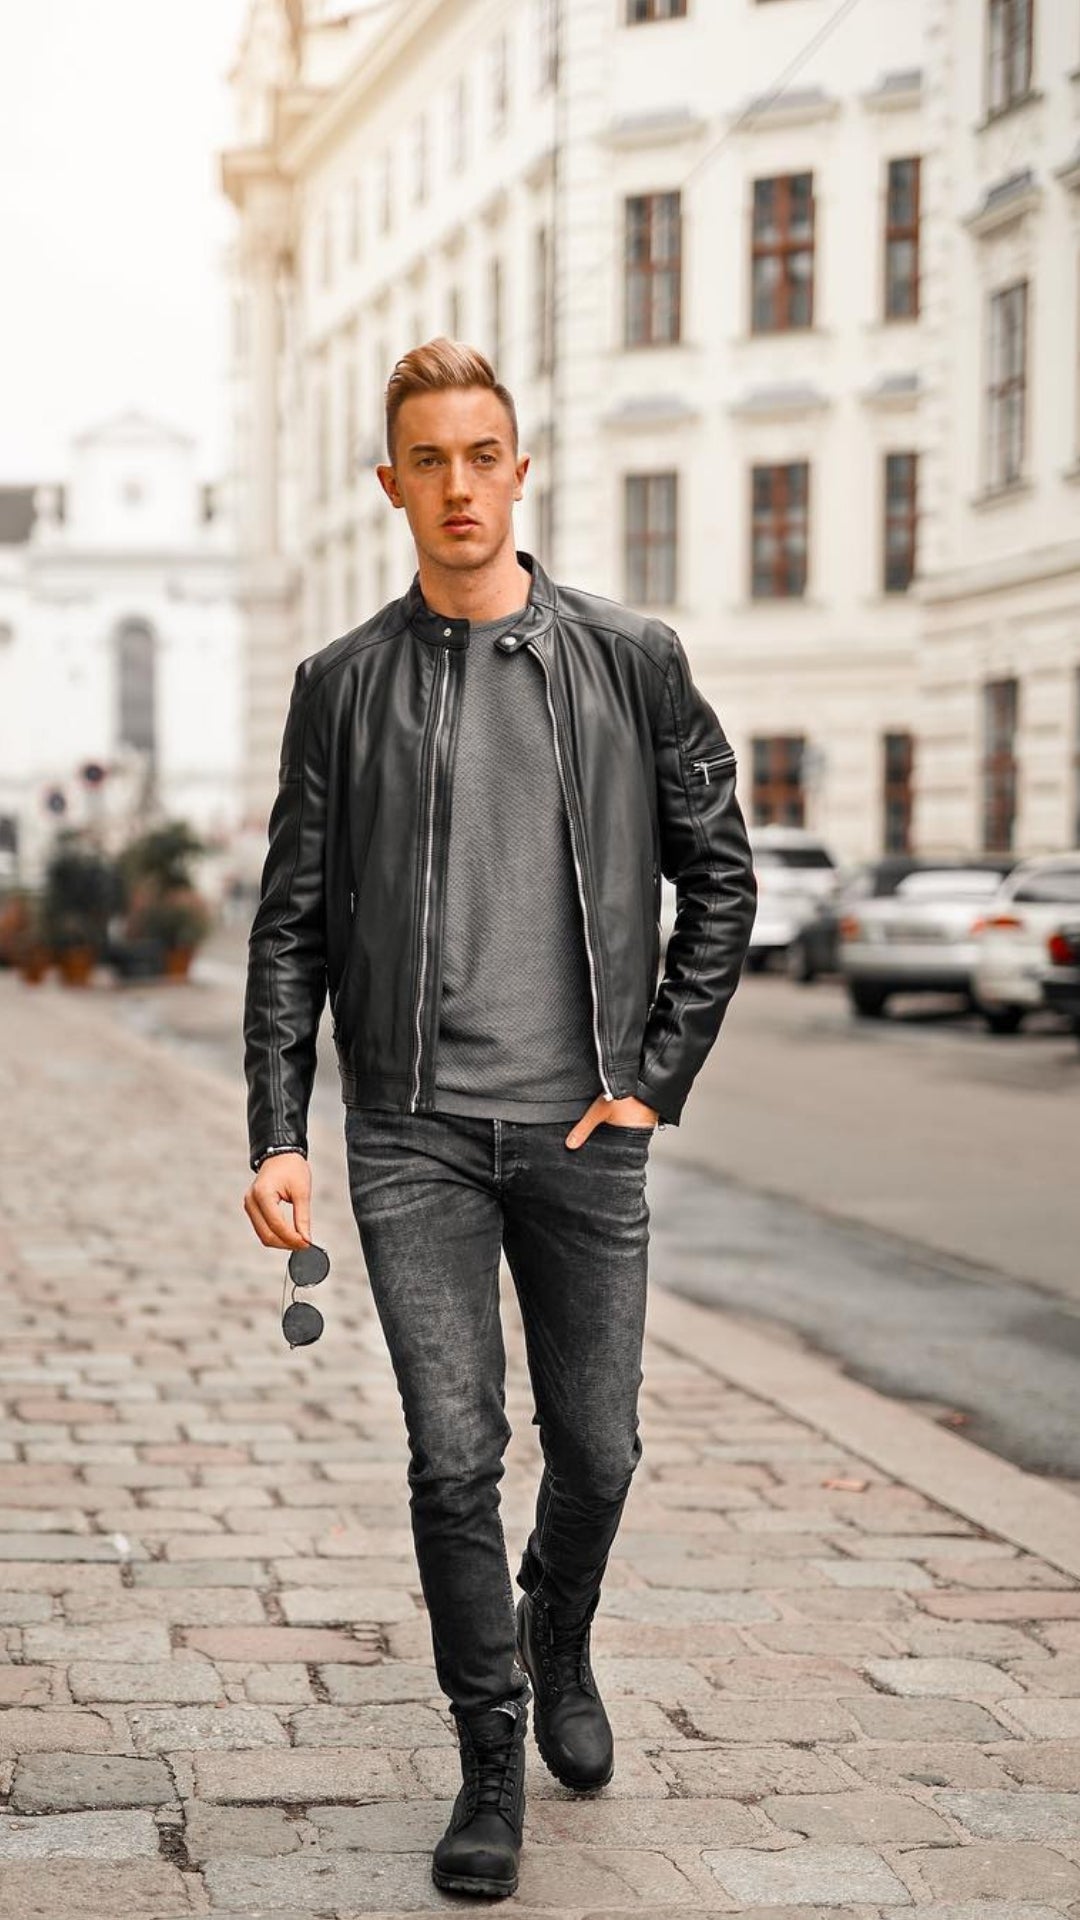 5 Coolest leather jacket outfits for men. #leather #jacket #outfits #streetstyle #mensfashion